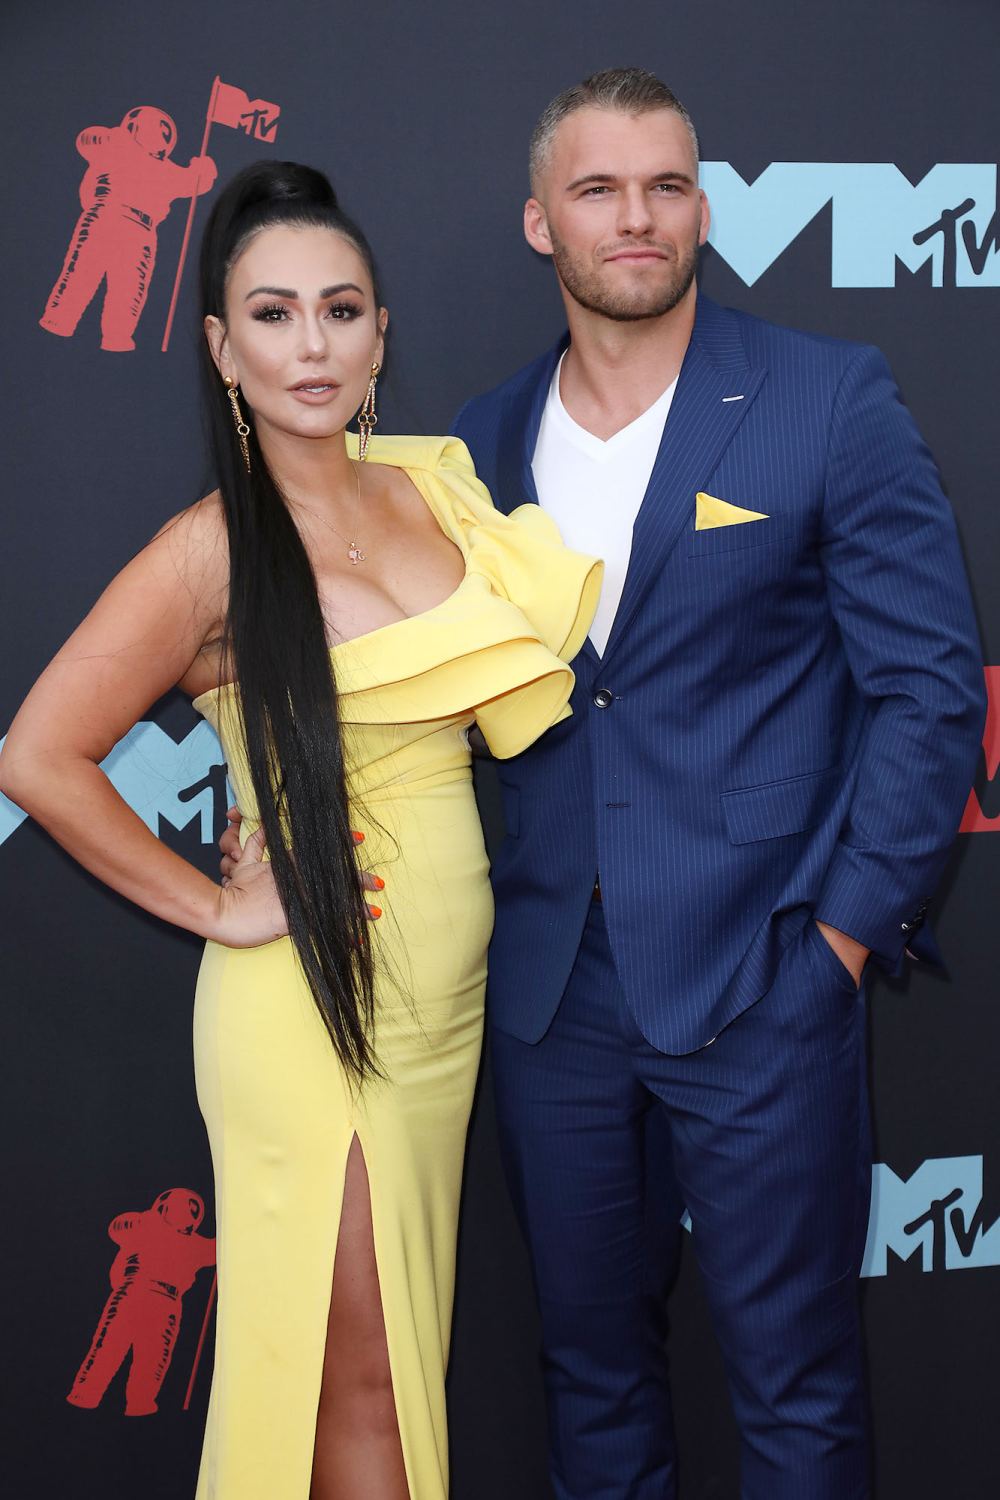 Angelina Pivarnick Posts About ‘Being Strong’ After JWoww Flirting Scandal